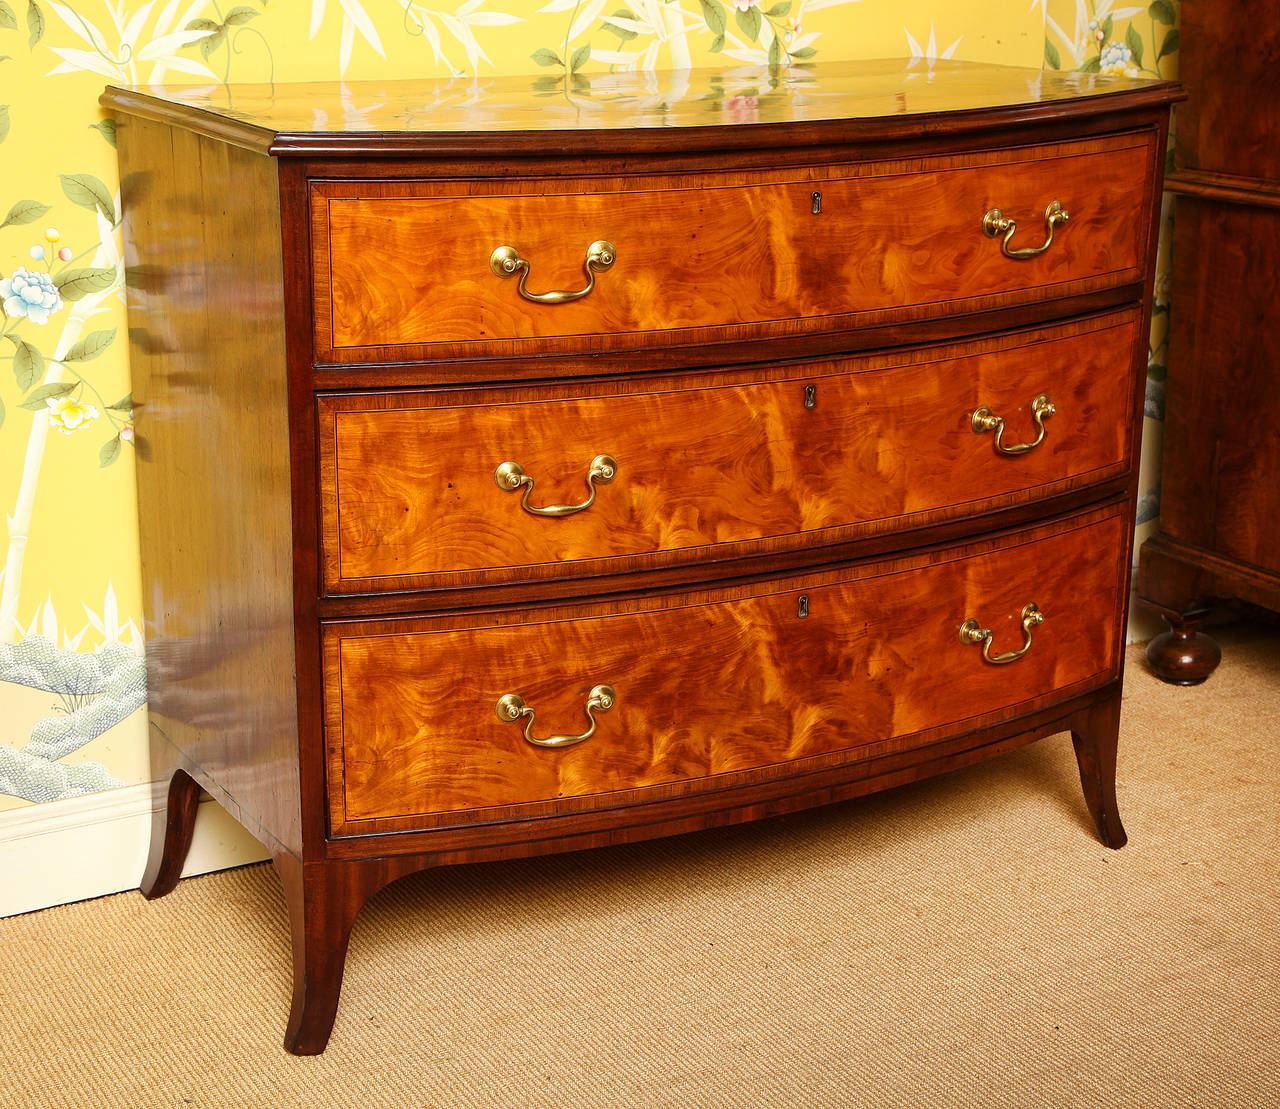 Fine Antique Sheraton Period Bowfront Satinwood Chest of Drawers, the top having a figured central oval mahogany inlay and four quadrants of satinwood with rosewood crossbanding, above three graduated drawers with cockbeading, line inlay and